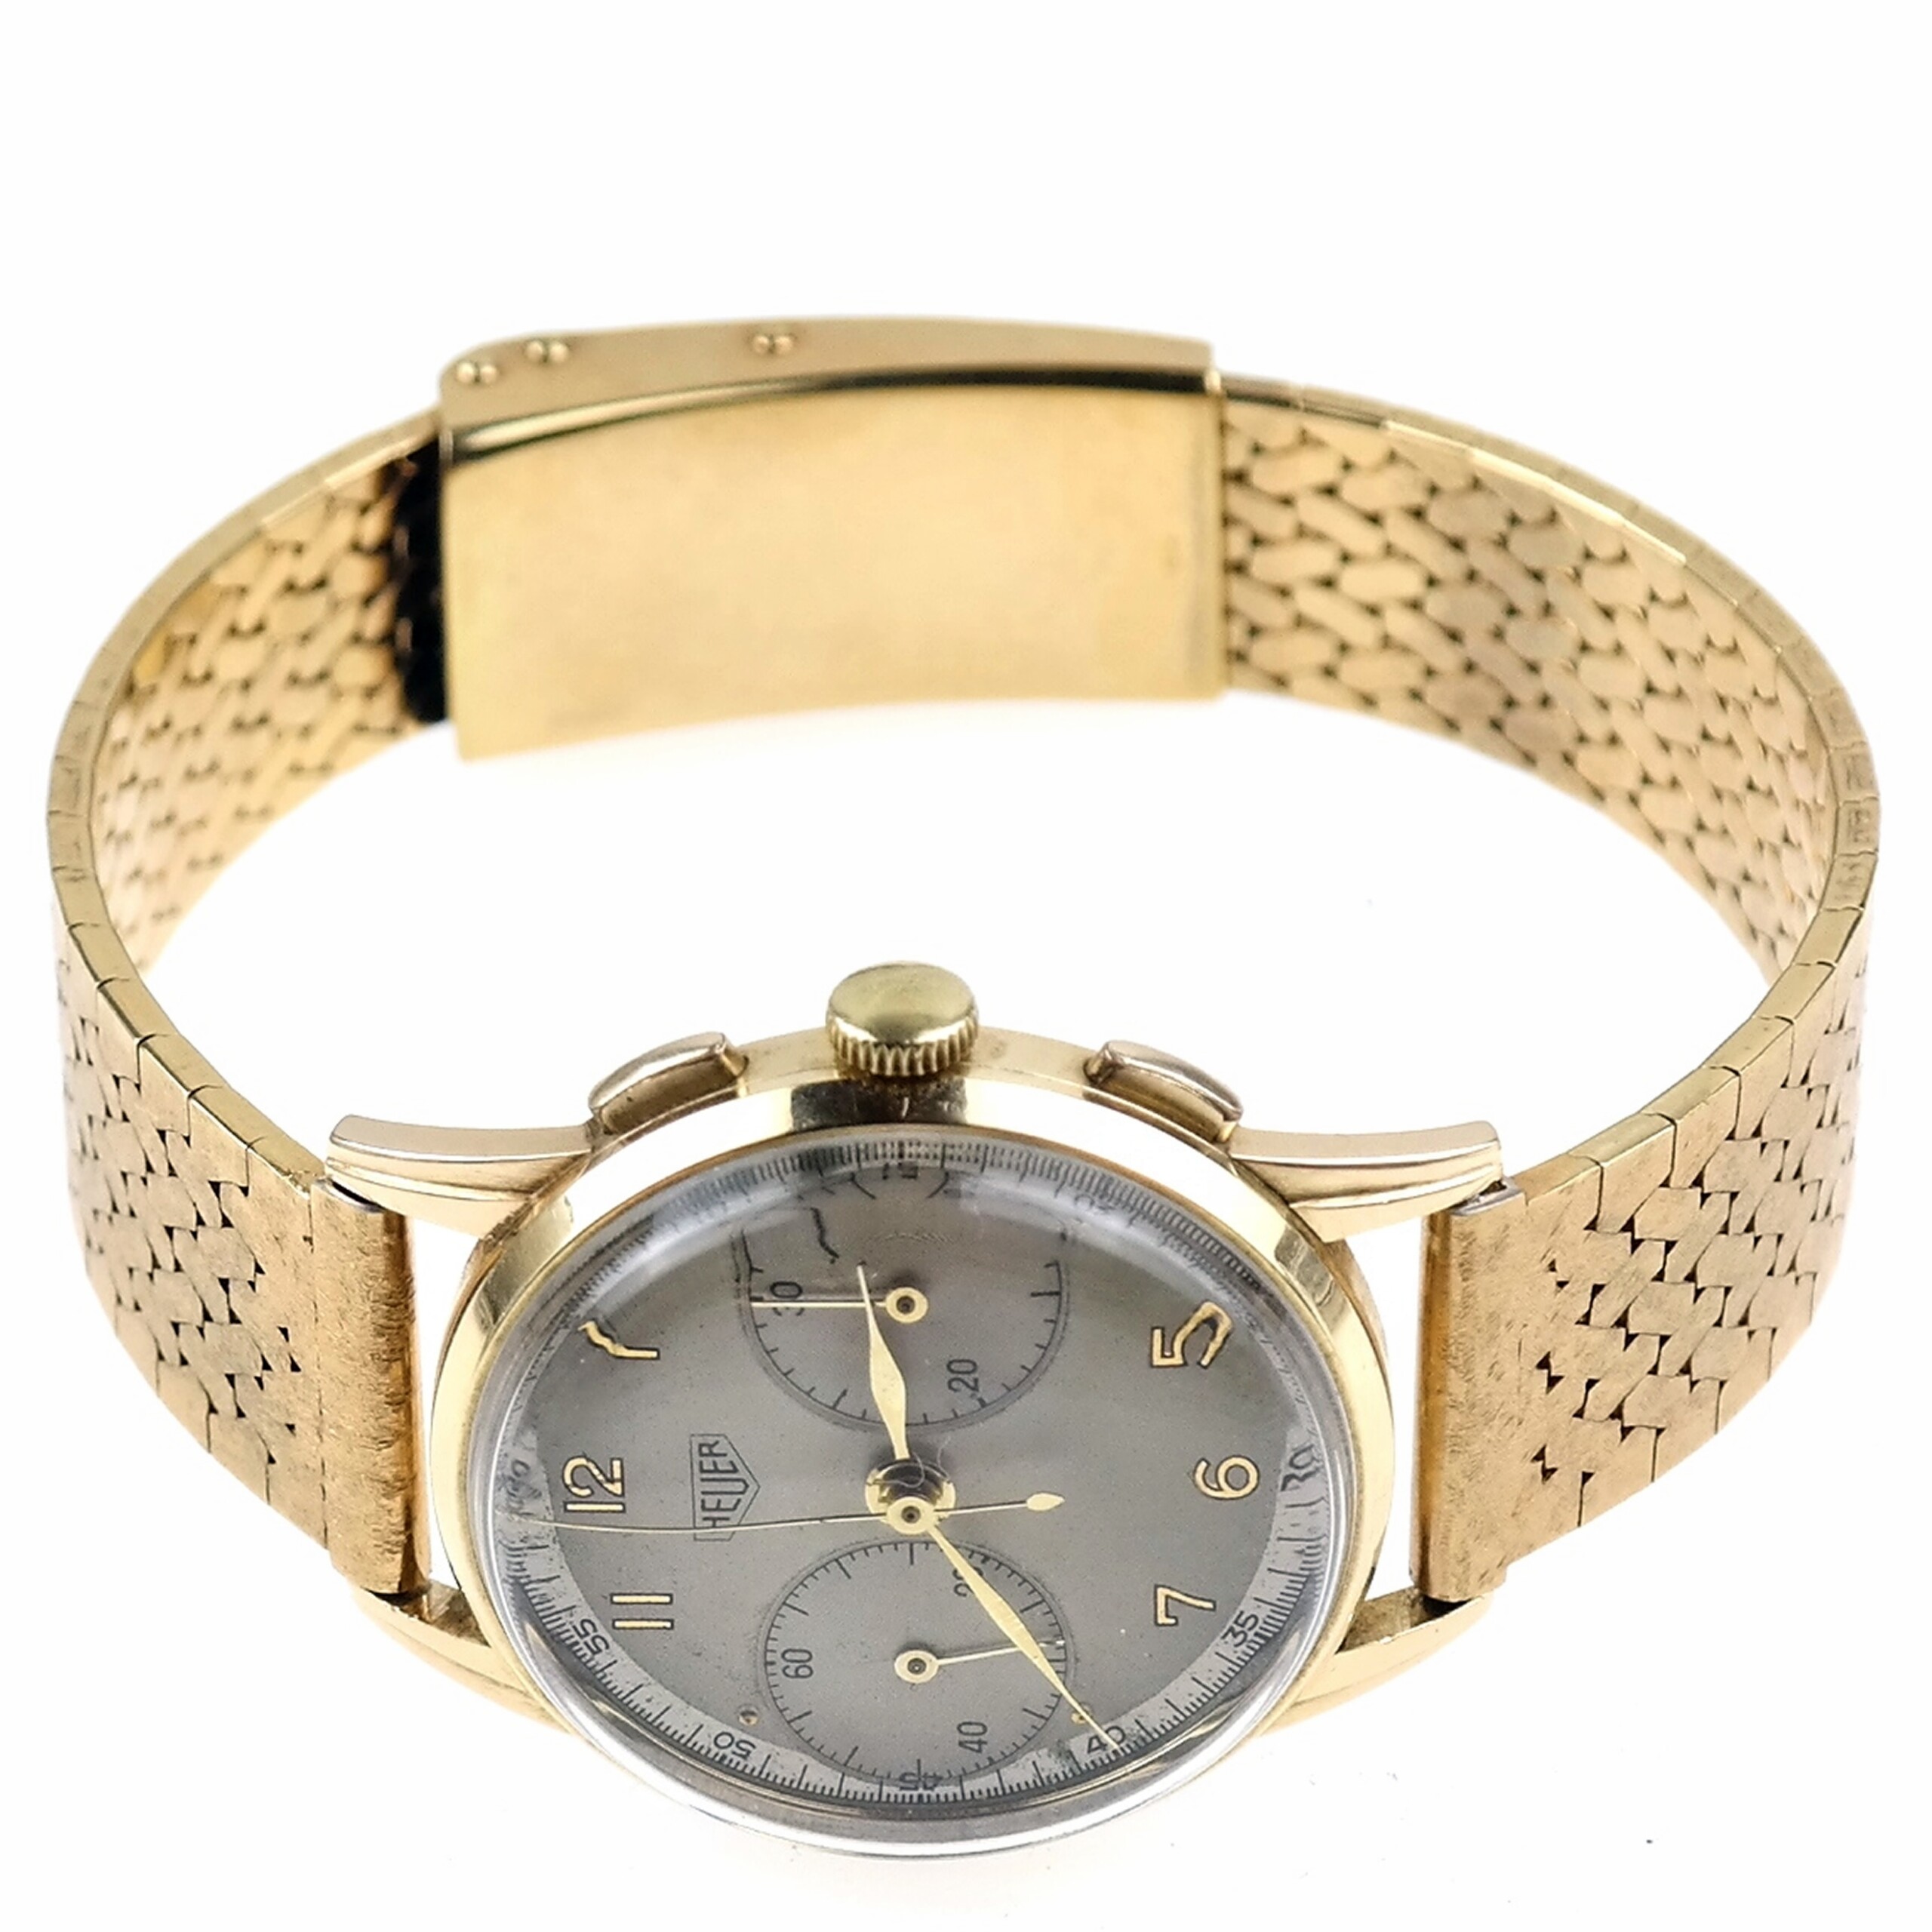 HEUER "Big Eyes" Valjoux 23 Chronograph Solid Gold from 1940s